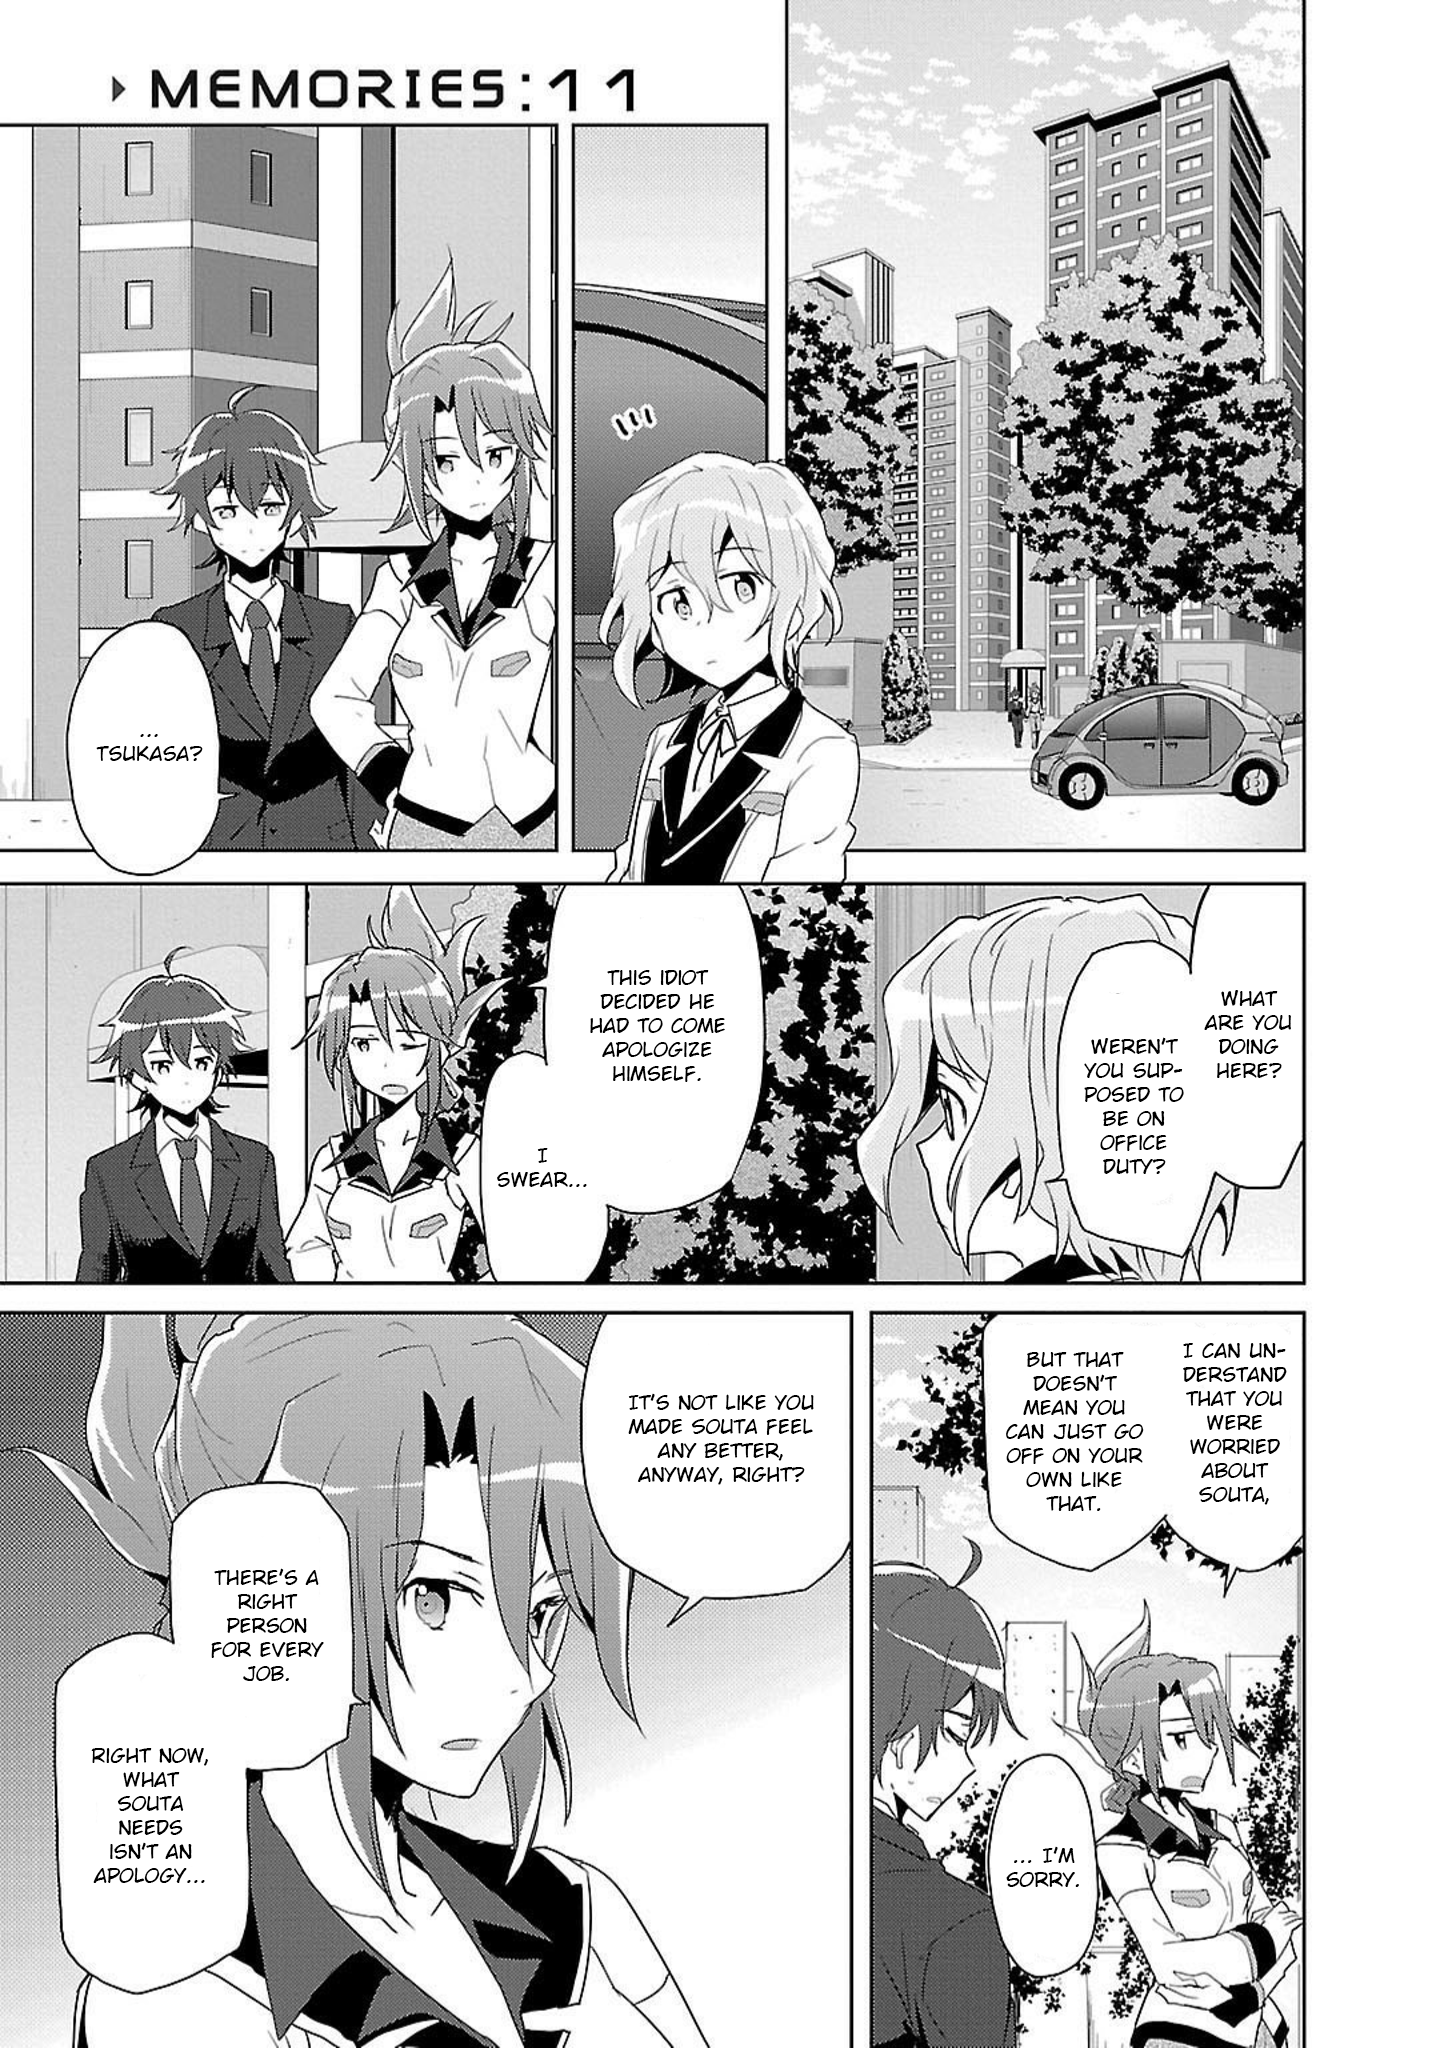 Plastic Memories - Say To Good-Bye Vol.2 Chapter 11: Memories: 11 - Picture 1